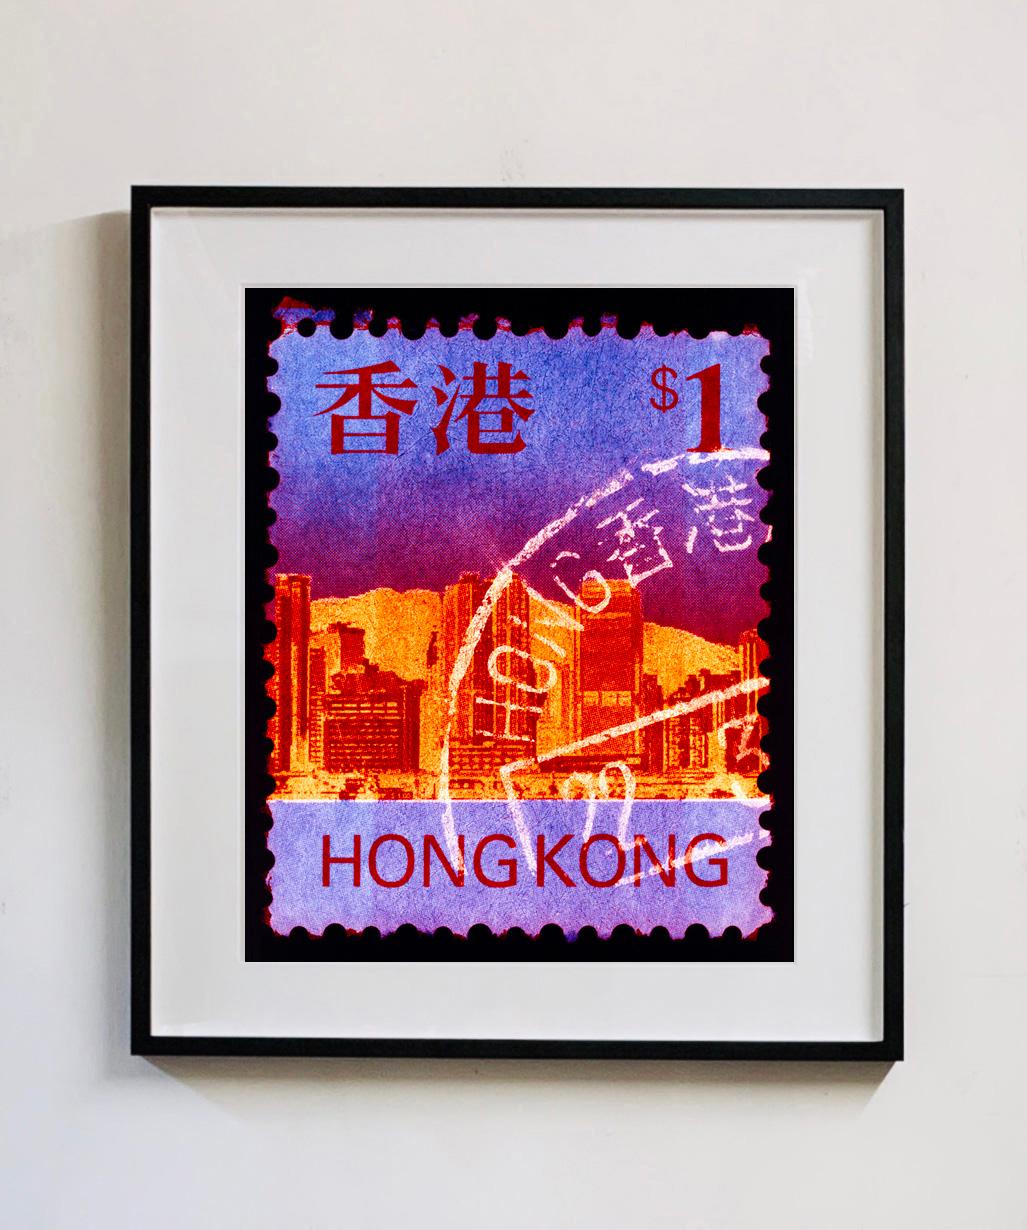 HK$1, from the Heidler & Heeps Stamp Collection Hong Kong Series. The fine detailed tapestry of the original small postage stamp has been brought to life, made unique by the franking stamp and Heidler & Heeps specialist darkroom process.

This